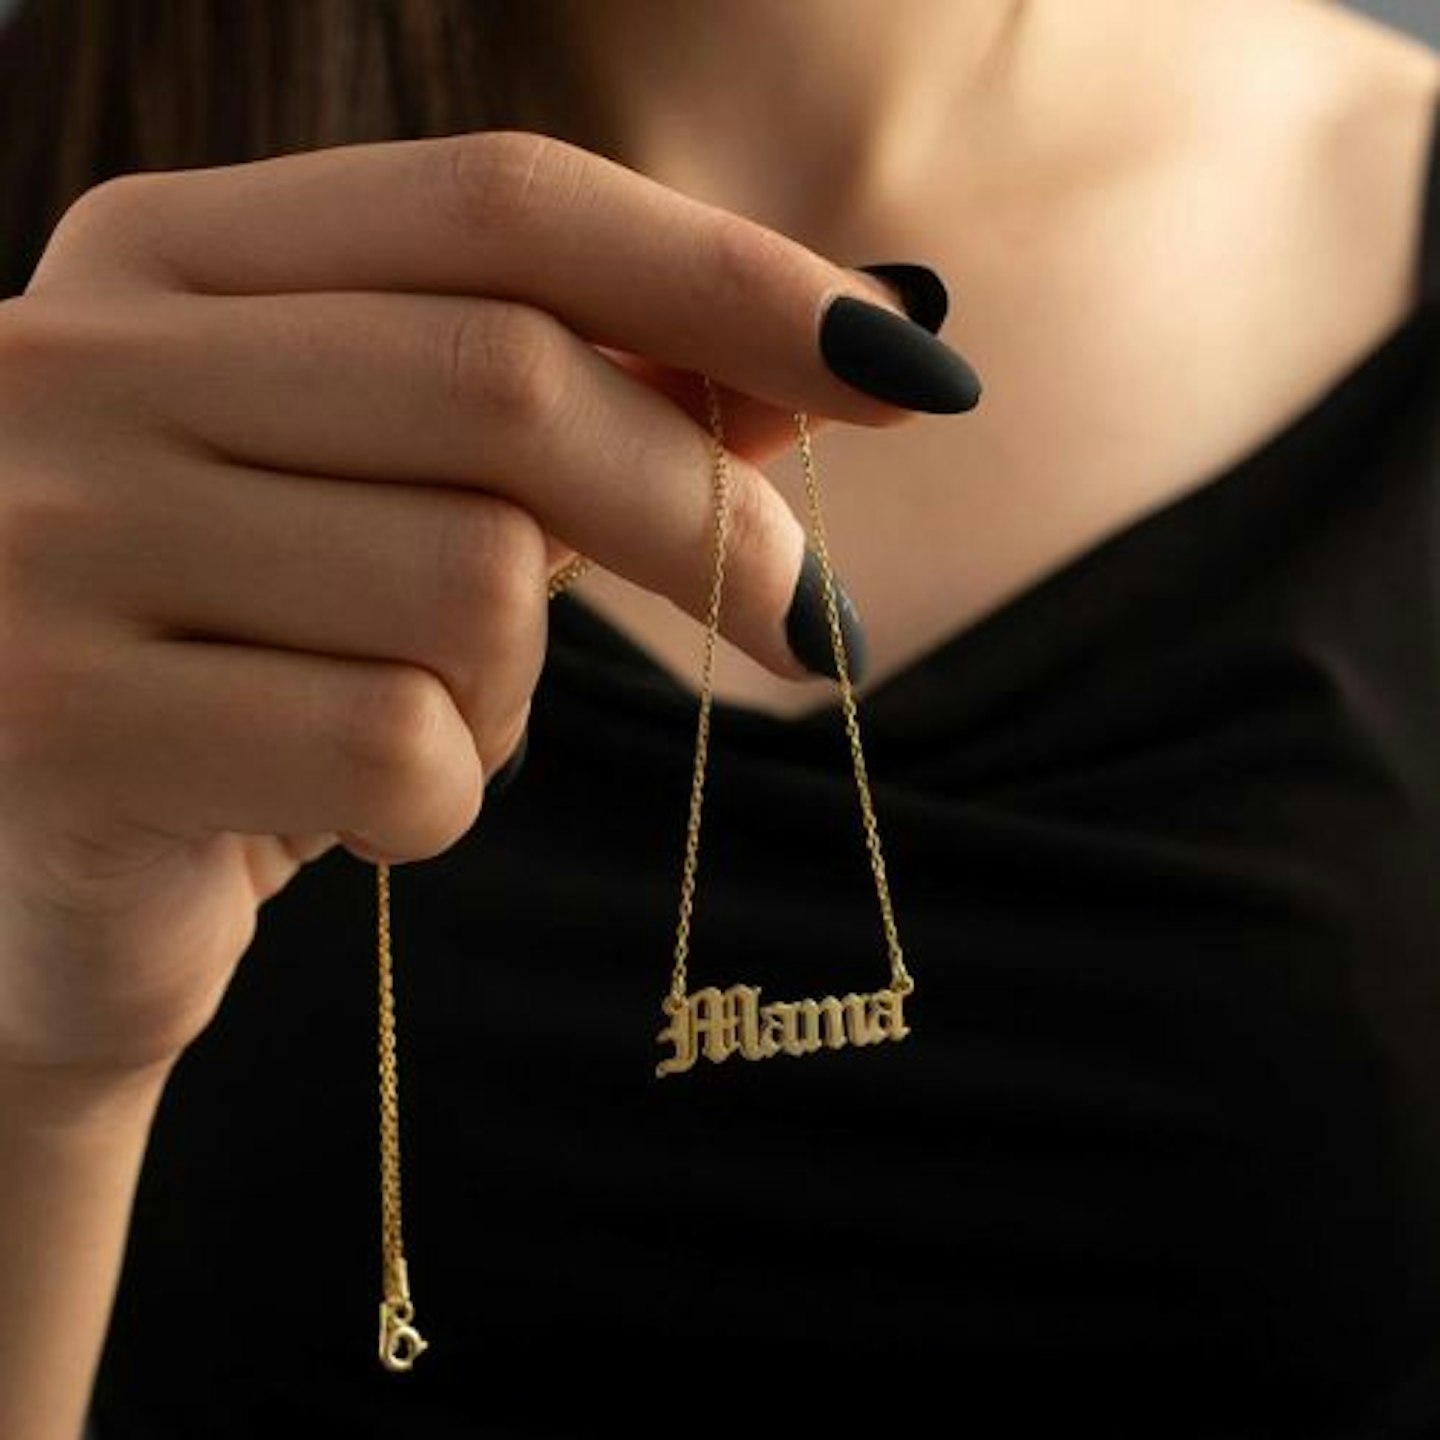 Custom Name Necklace in Old English Font